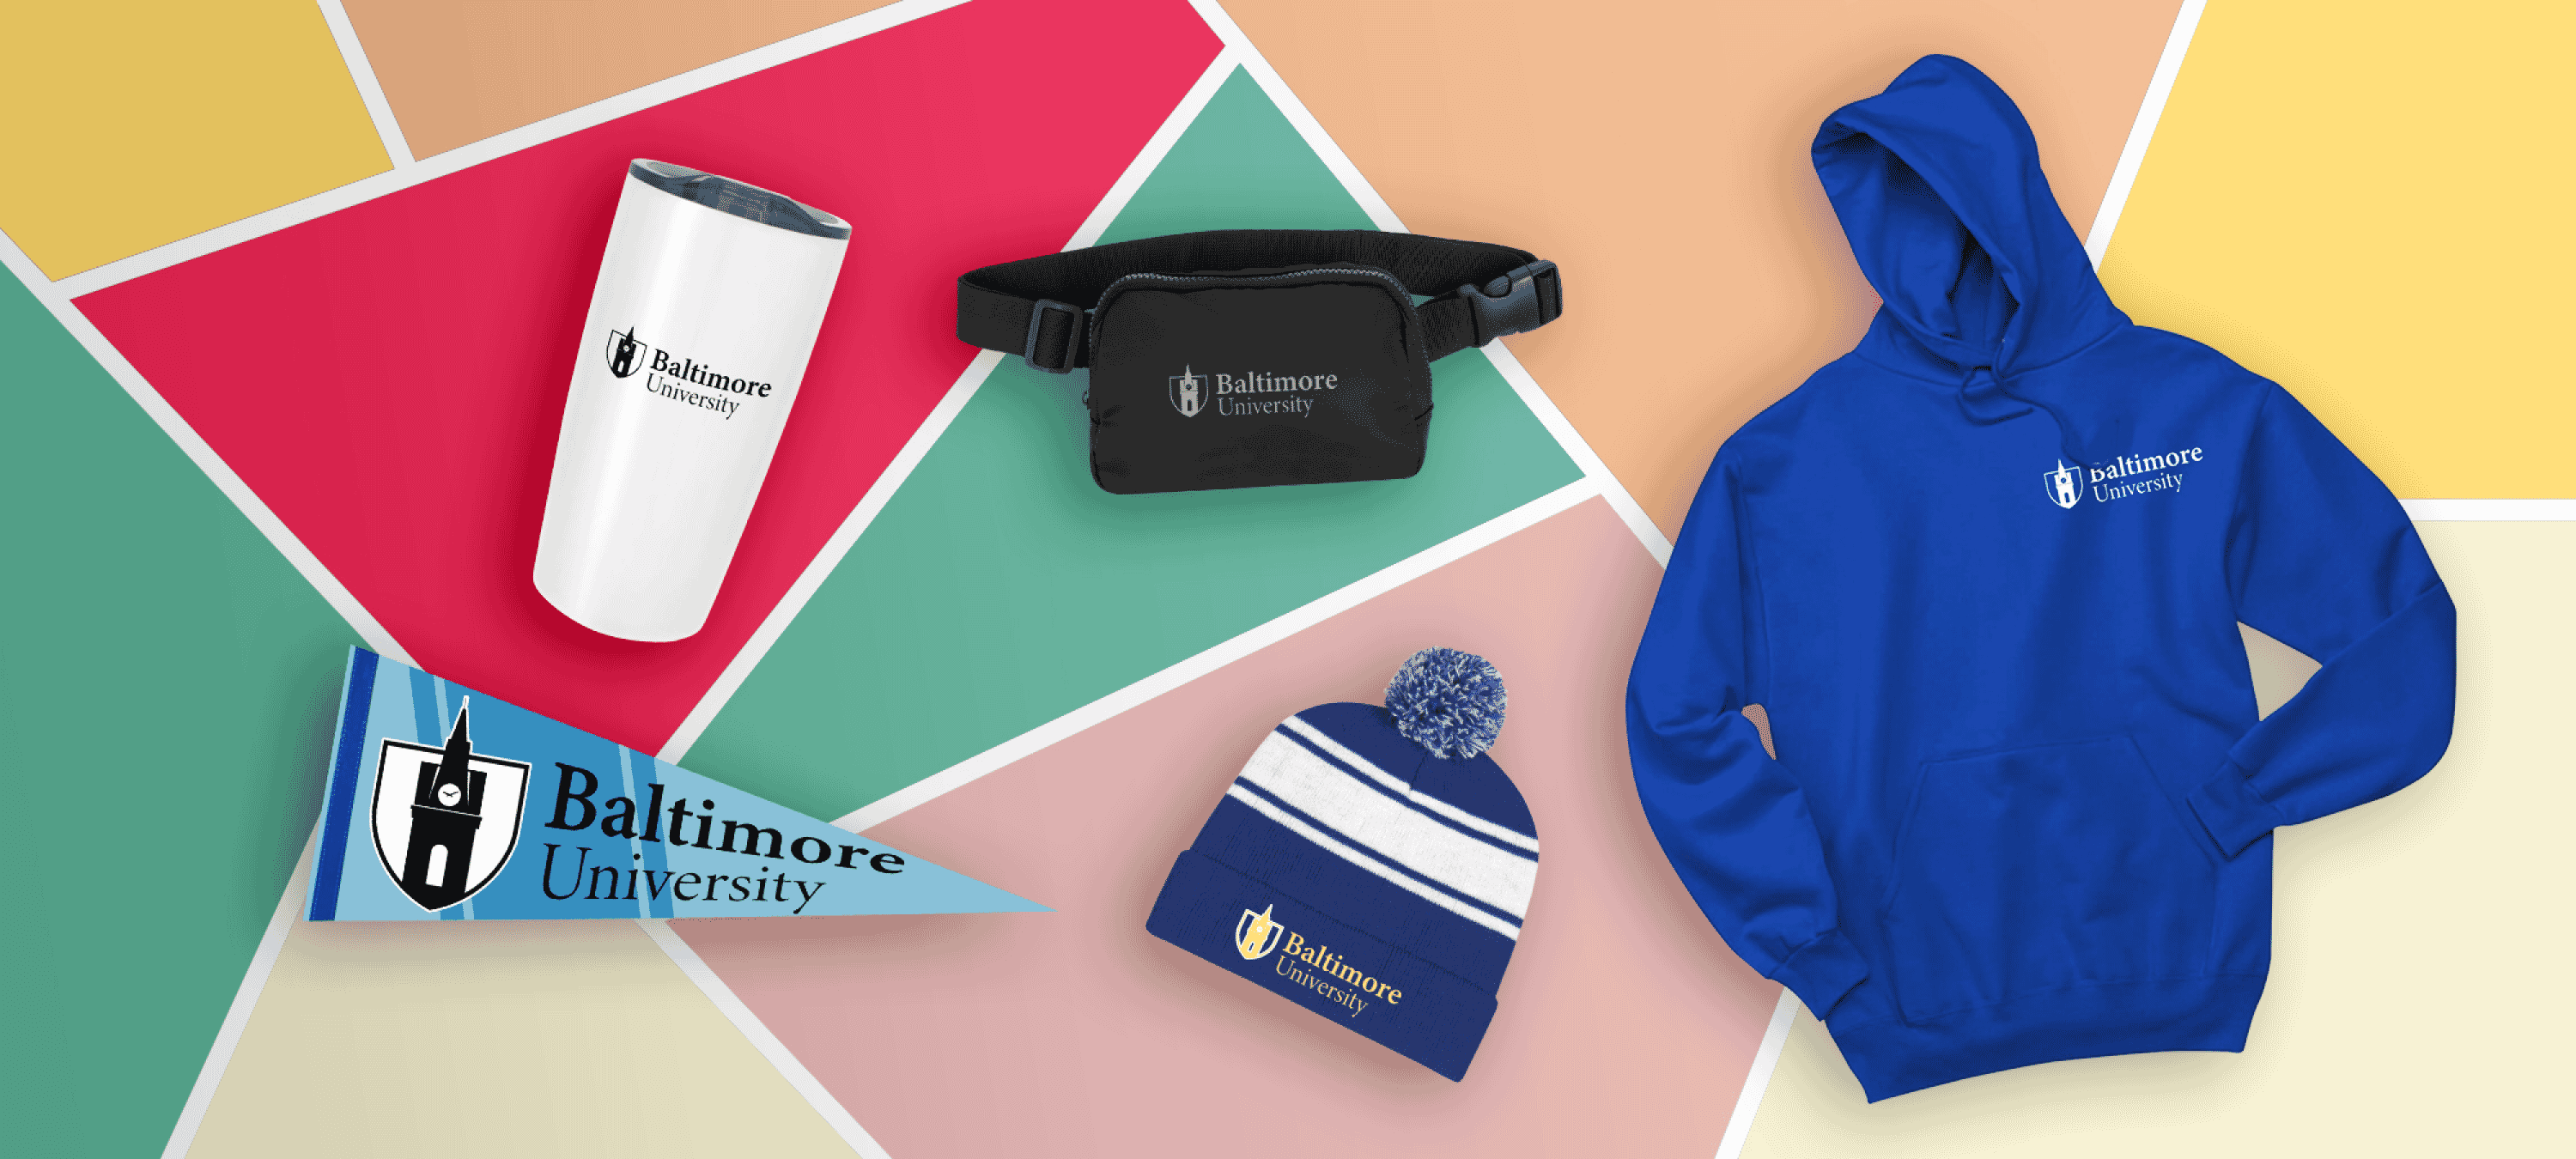 Turn Admission into Enrollment: 30 Best College<br>Acceptance Packages & Student Welcome Gifts